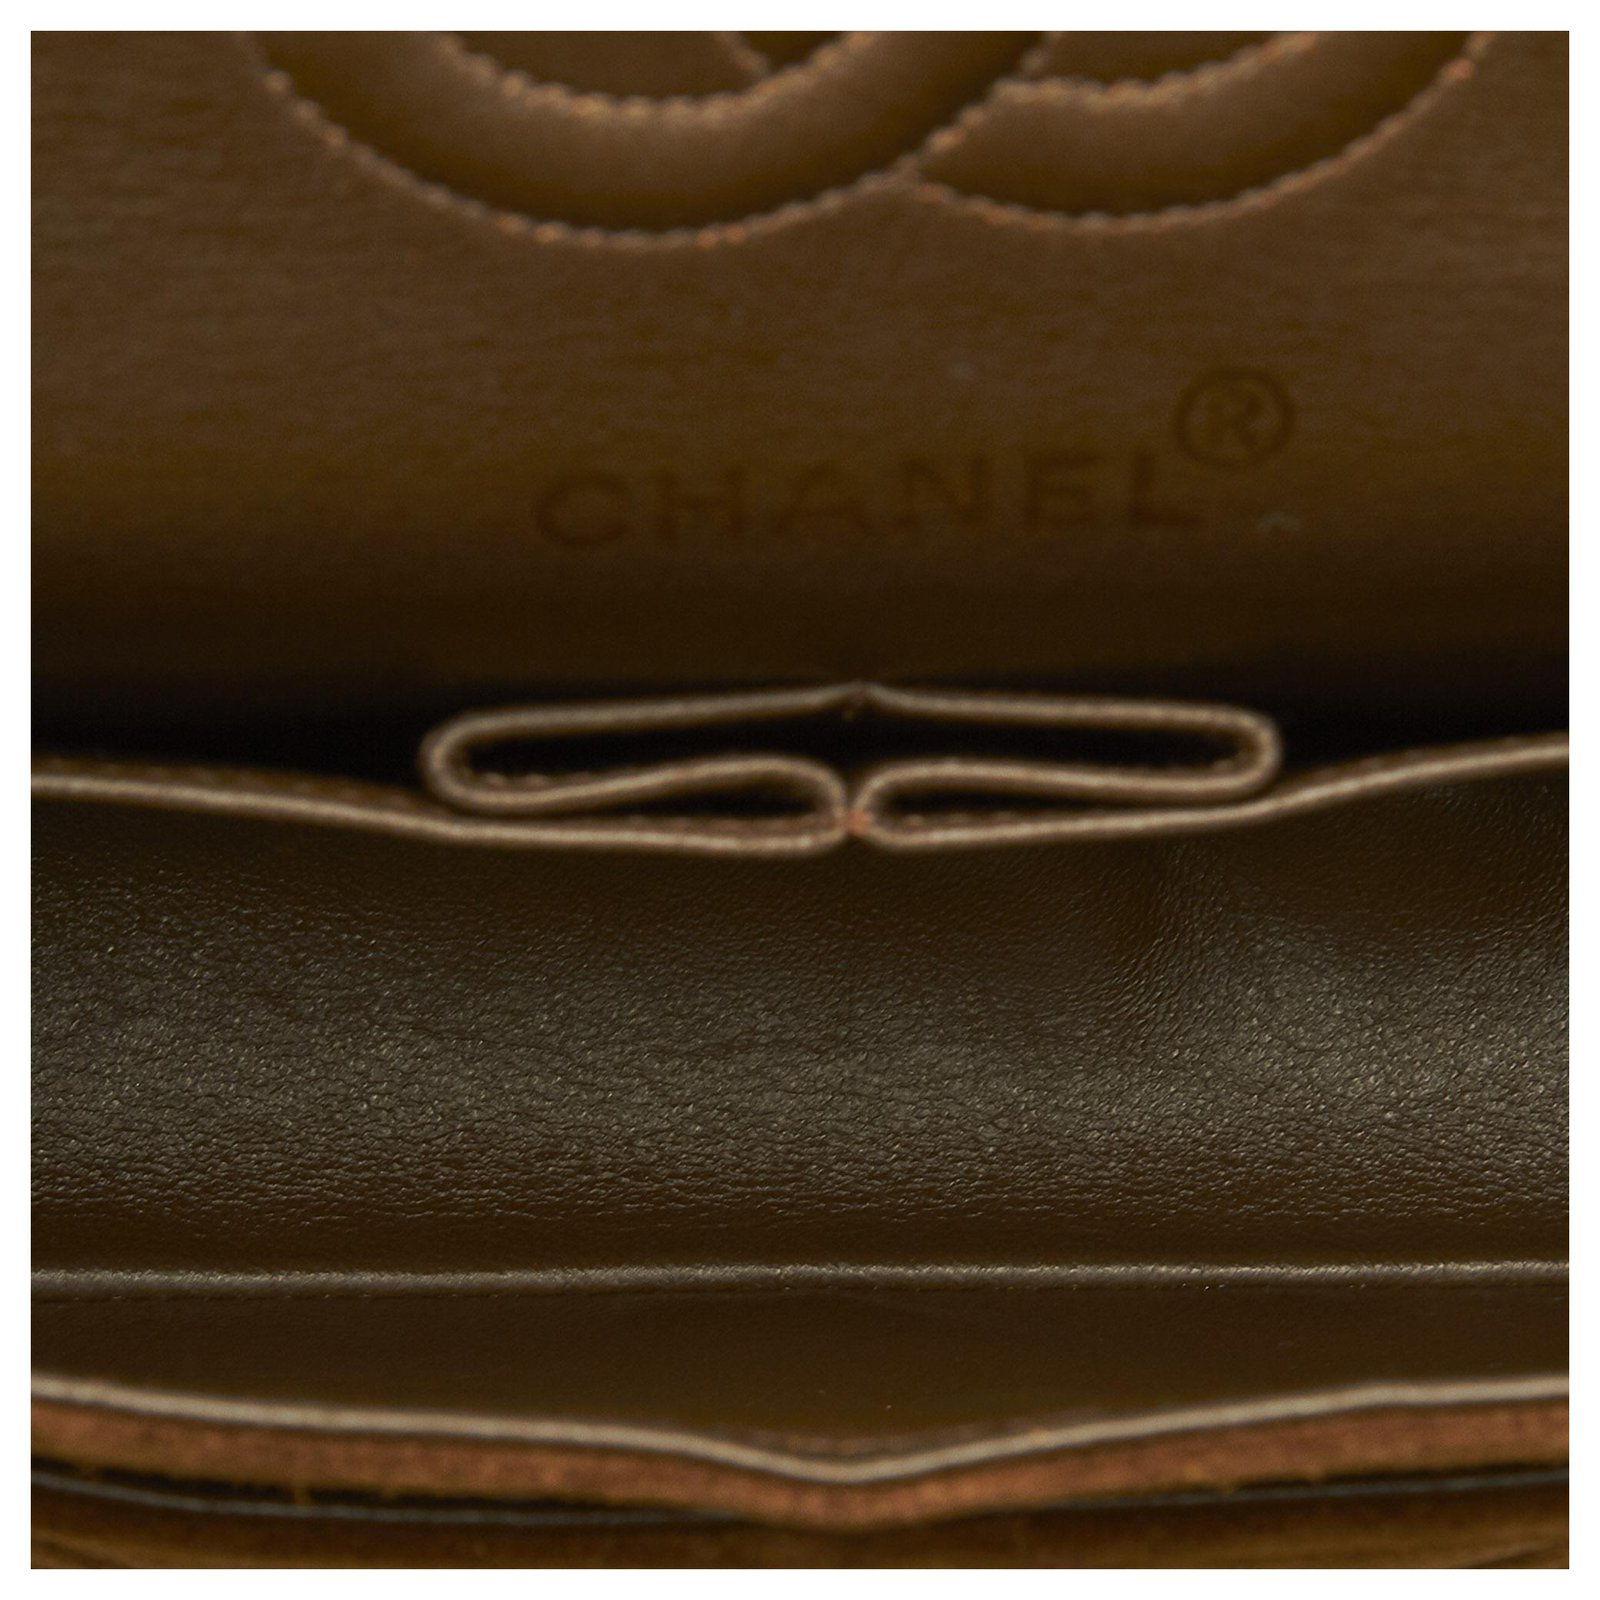 Timeless/classique leather crossbody bag Chanel Brown in Leather - 39059978